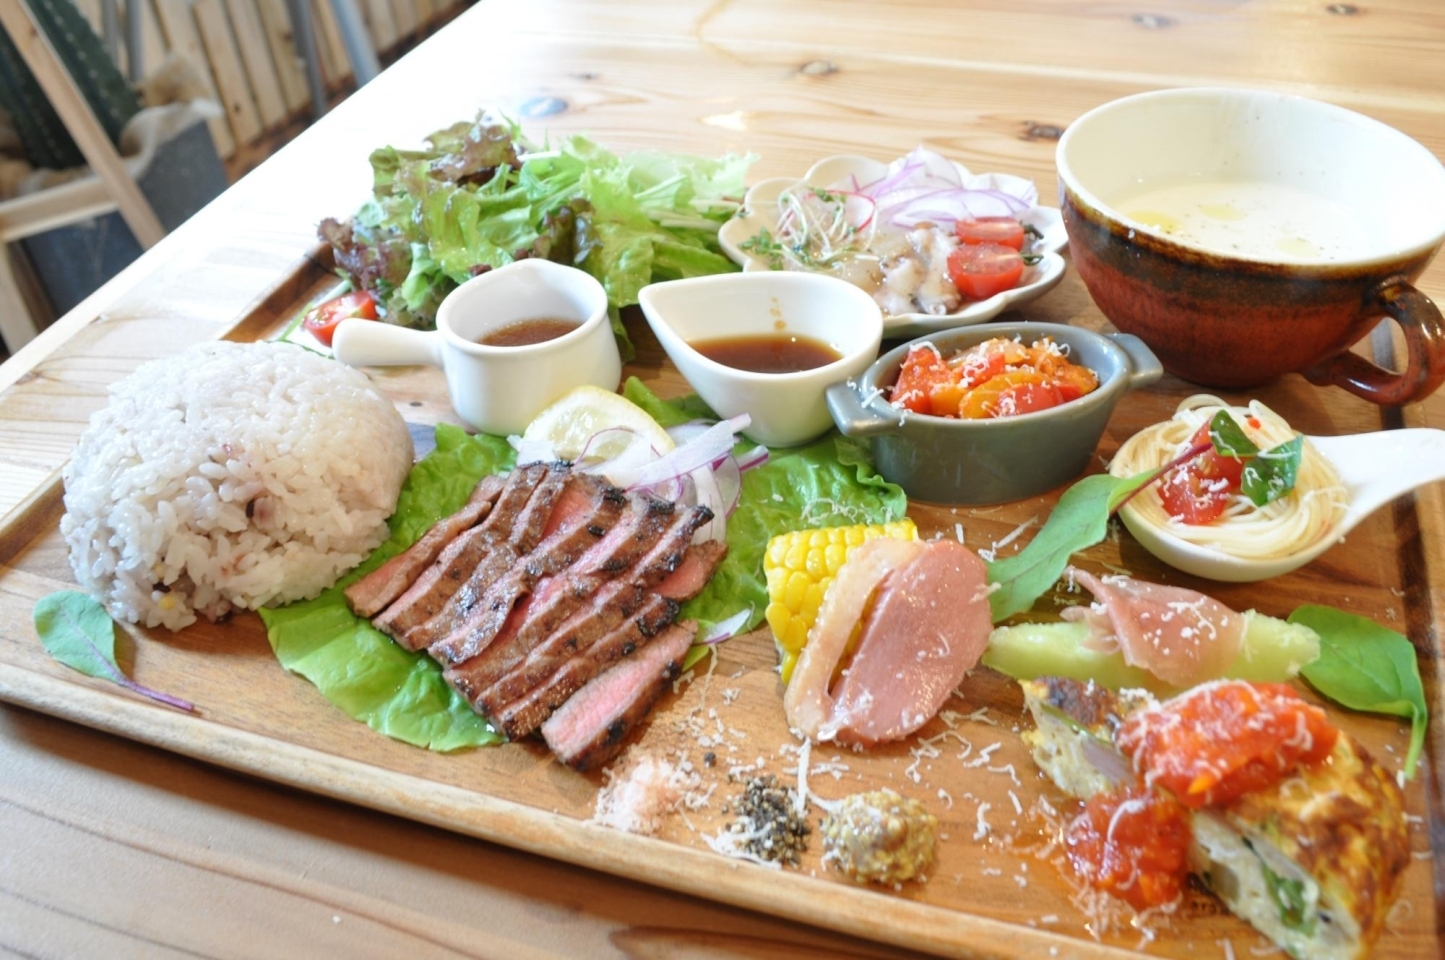  SPECIAL PLATE LUNCH / On Lento Café